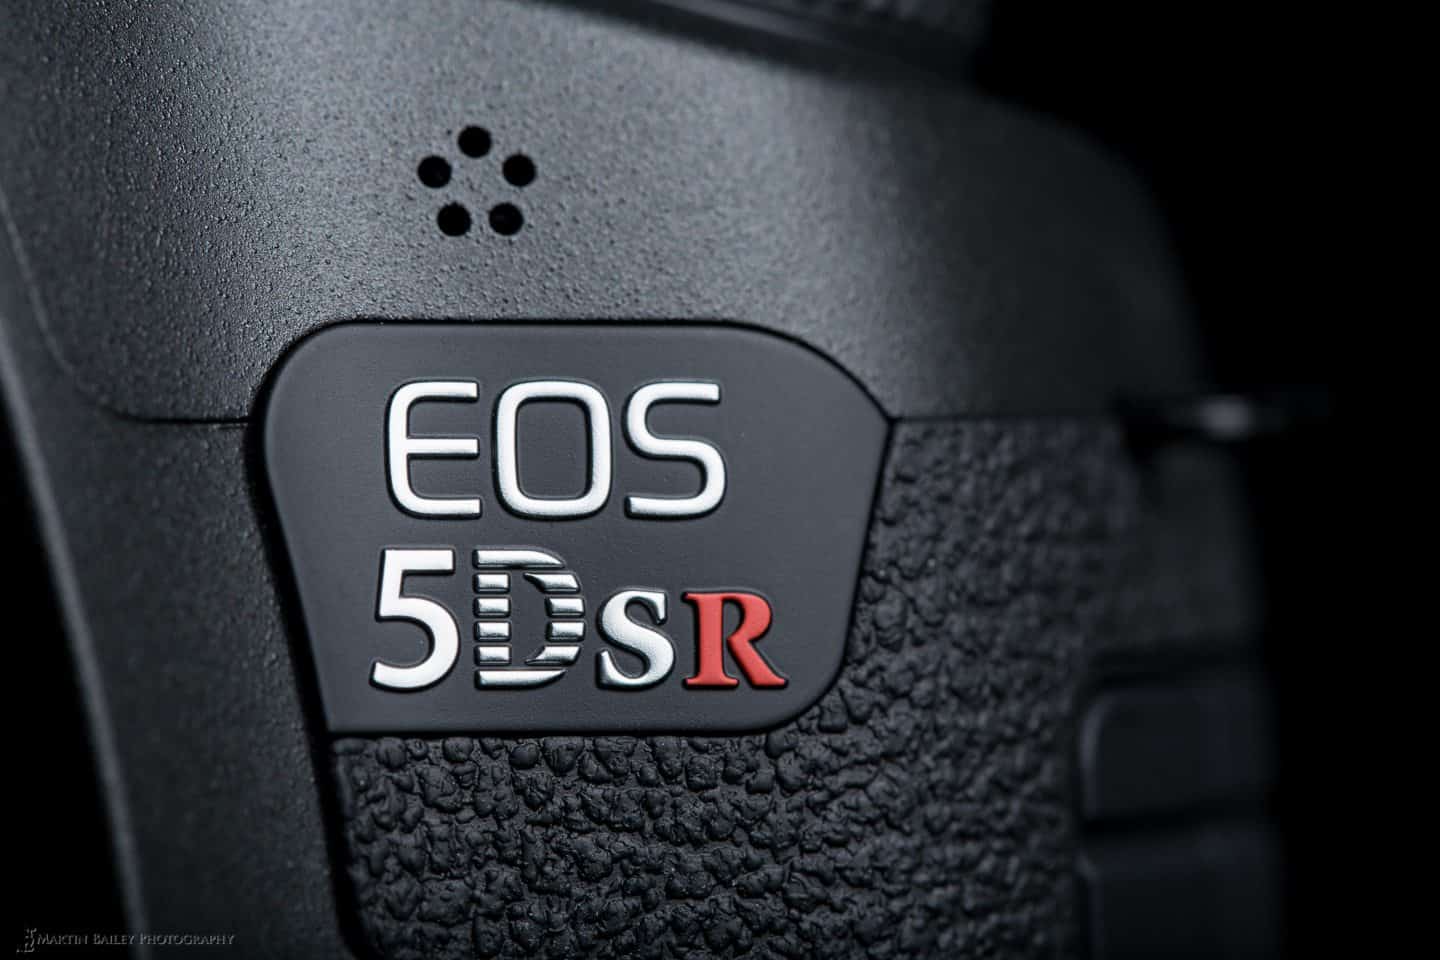 Canon EOS 5Ds R Digital SLR Camera Review (Podcast 478)